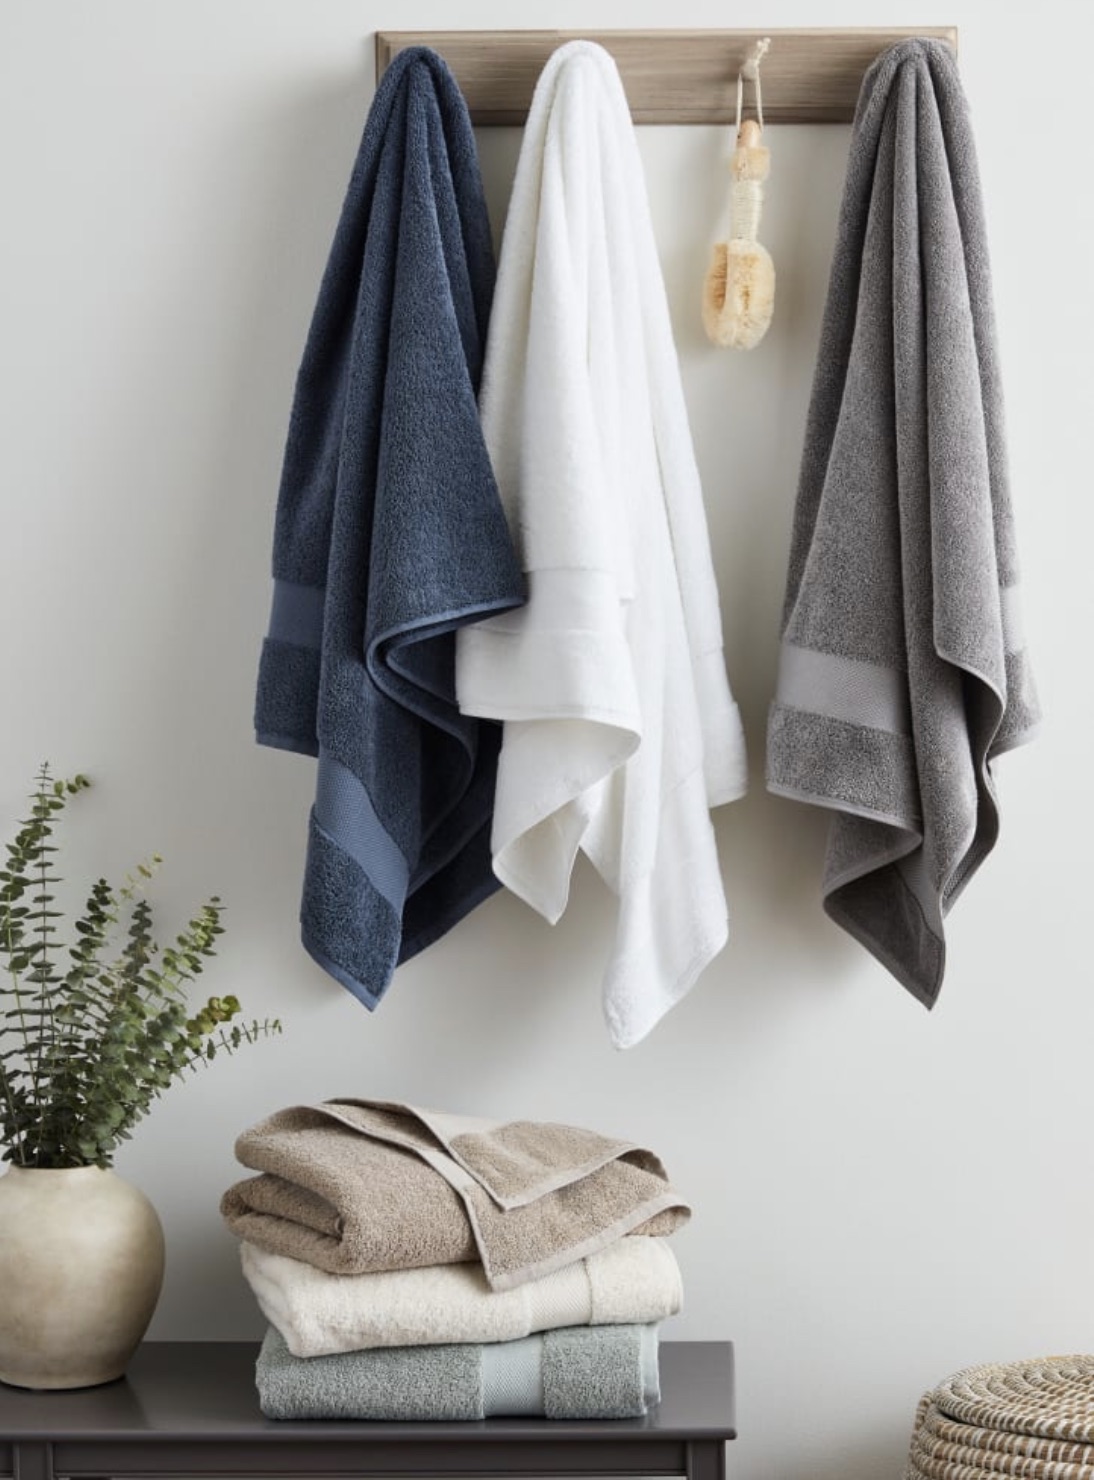 https://www.thegoodtrade.com/wp-content/uploads/2023/01/boll-and-branch-organic-towels.jpeg